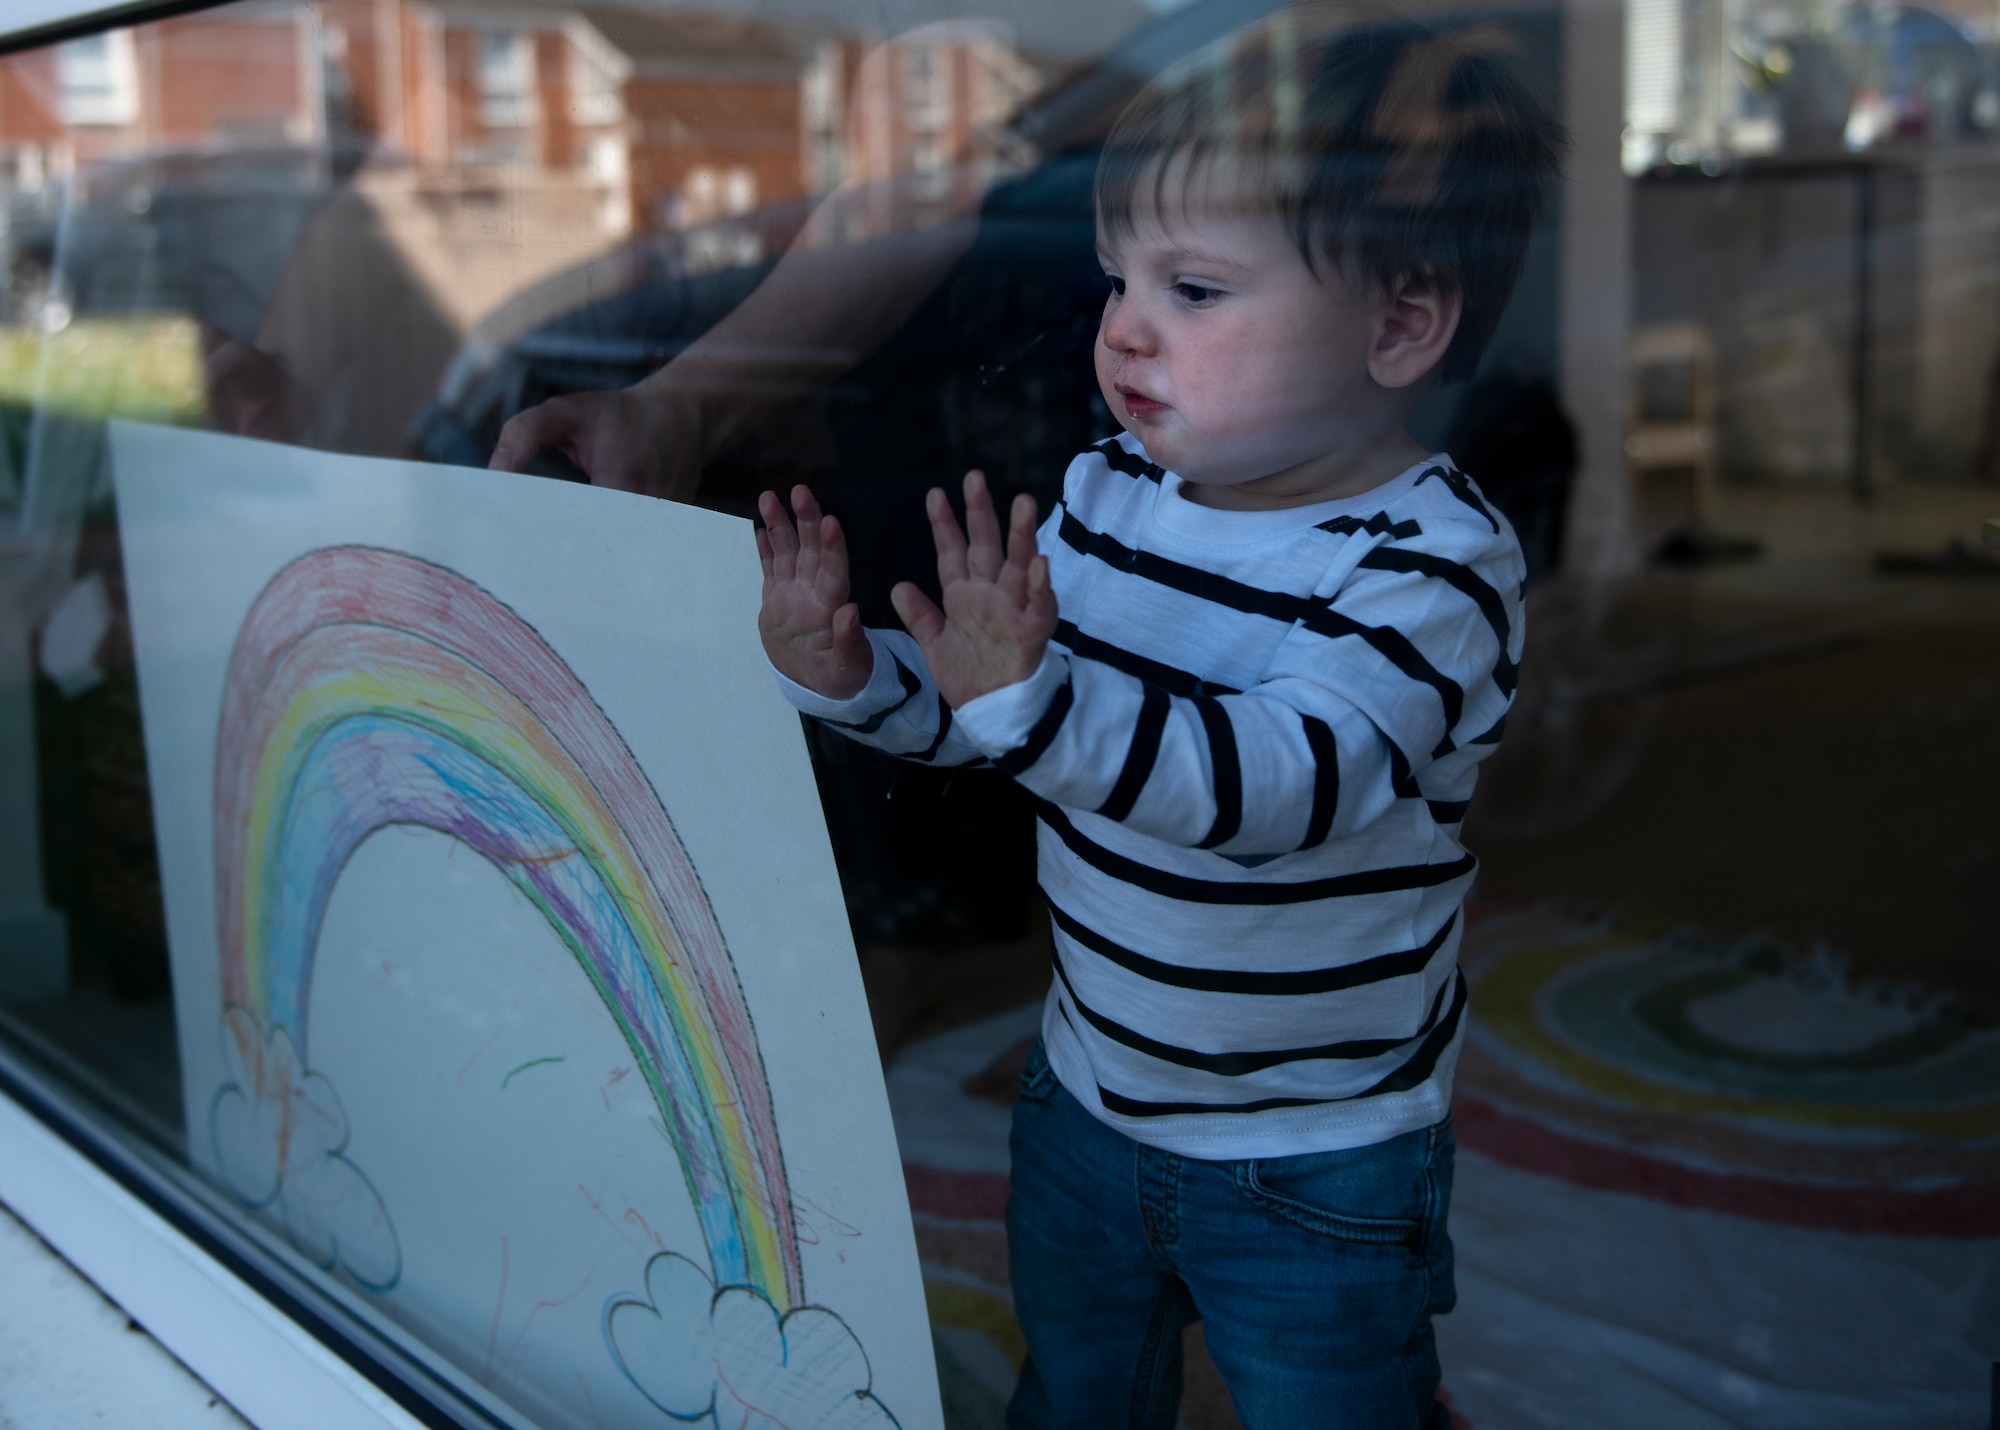 A child of a U.S. Air Force Airman displays rainbow artwork in their window in Liberty Village at Royal Air Force Lakenheath, England, April 22, 2020. The rainbow is a symbol of positivity and solidarity among the community during the current COVID-19 crisis. (U.S. Air Force photo by Airman 1st Class Jessi Monte)